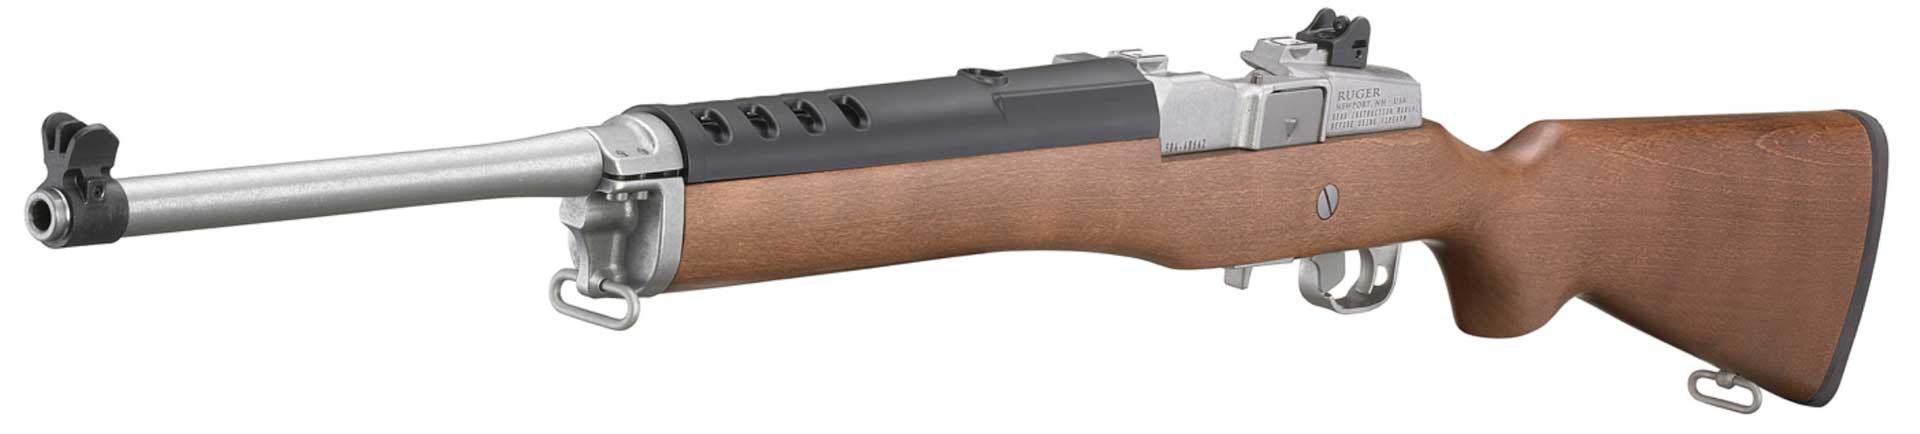 left side quartering view Ruger rifle carbine gun semi-automatic wood stainless steel